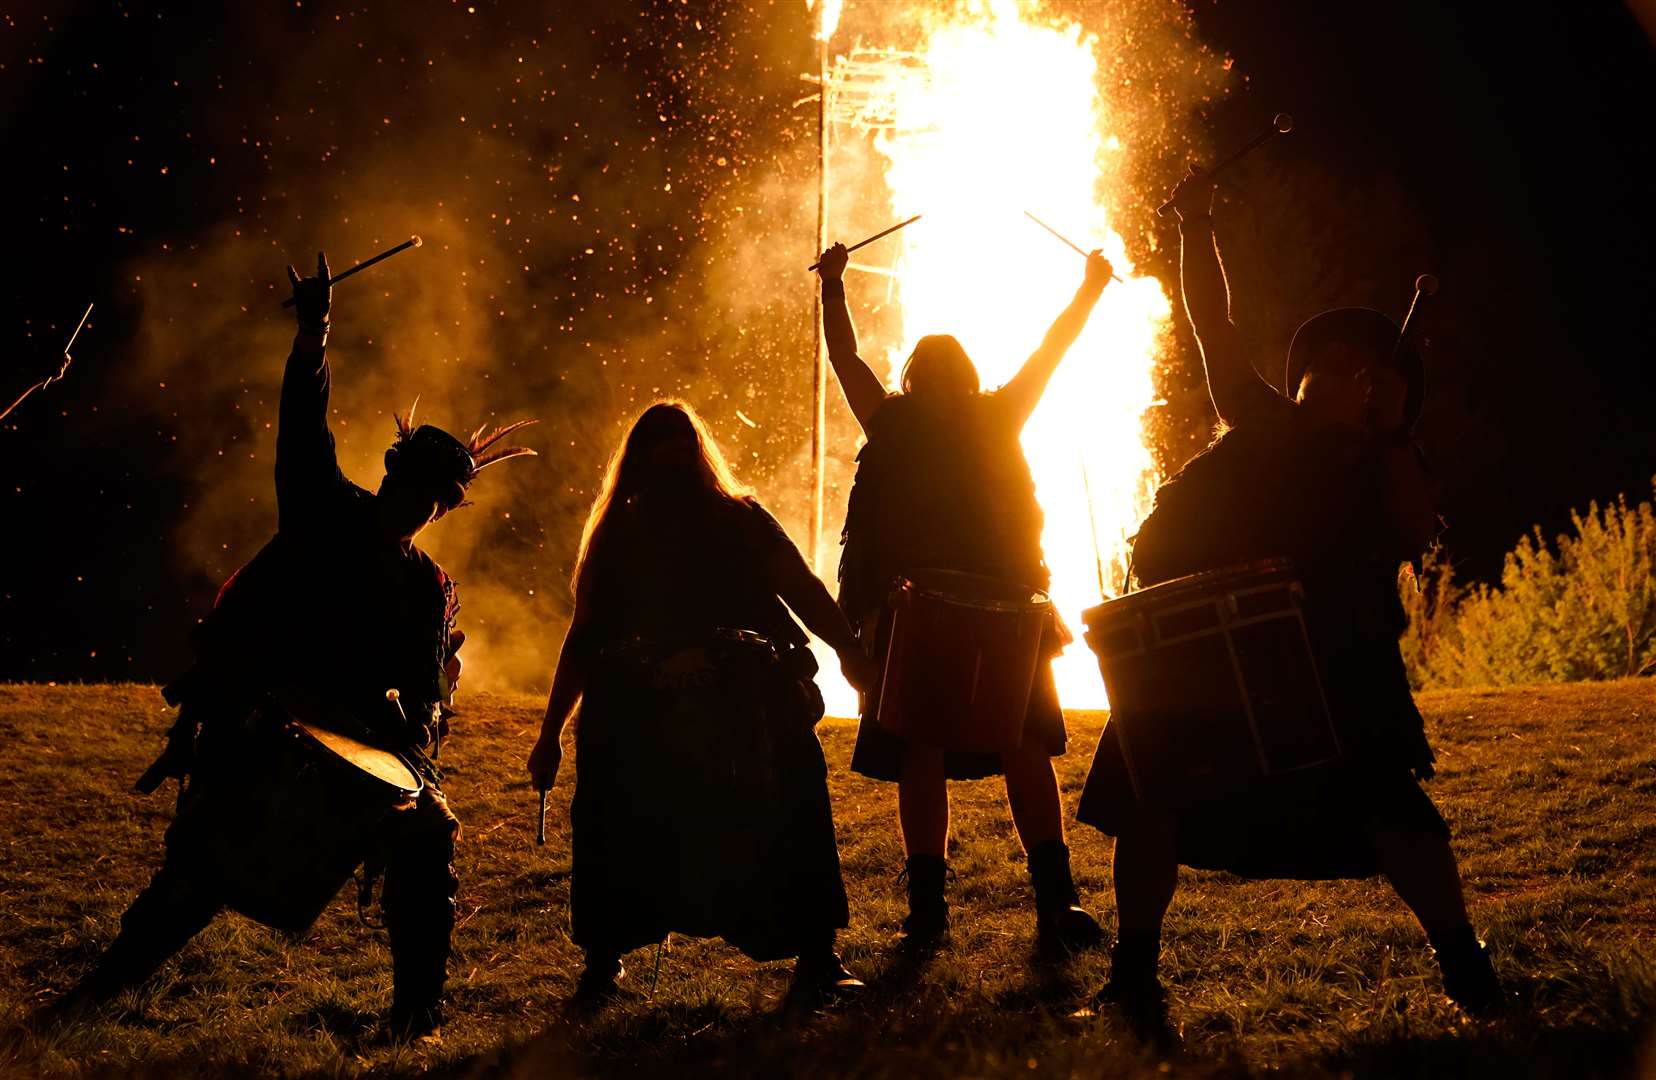 Members of the Pentacle Drummers perform in front of a burning wicker man during the Beltain Festival at Butser Ancient Farm in Waterlooville, Hampshire, in April (Andrew Matthews/PA)